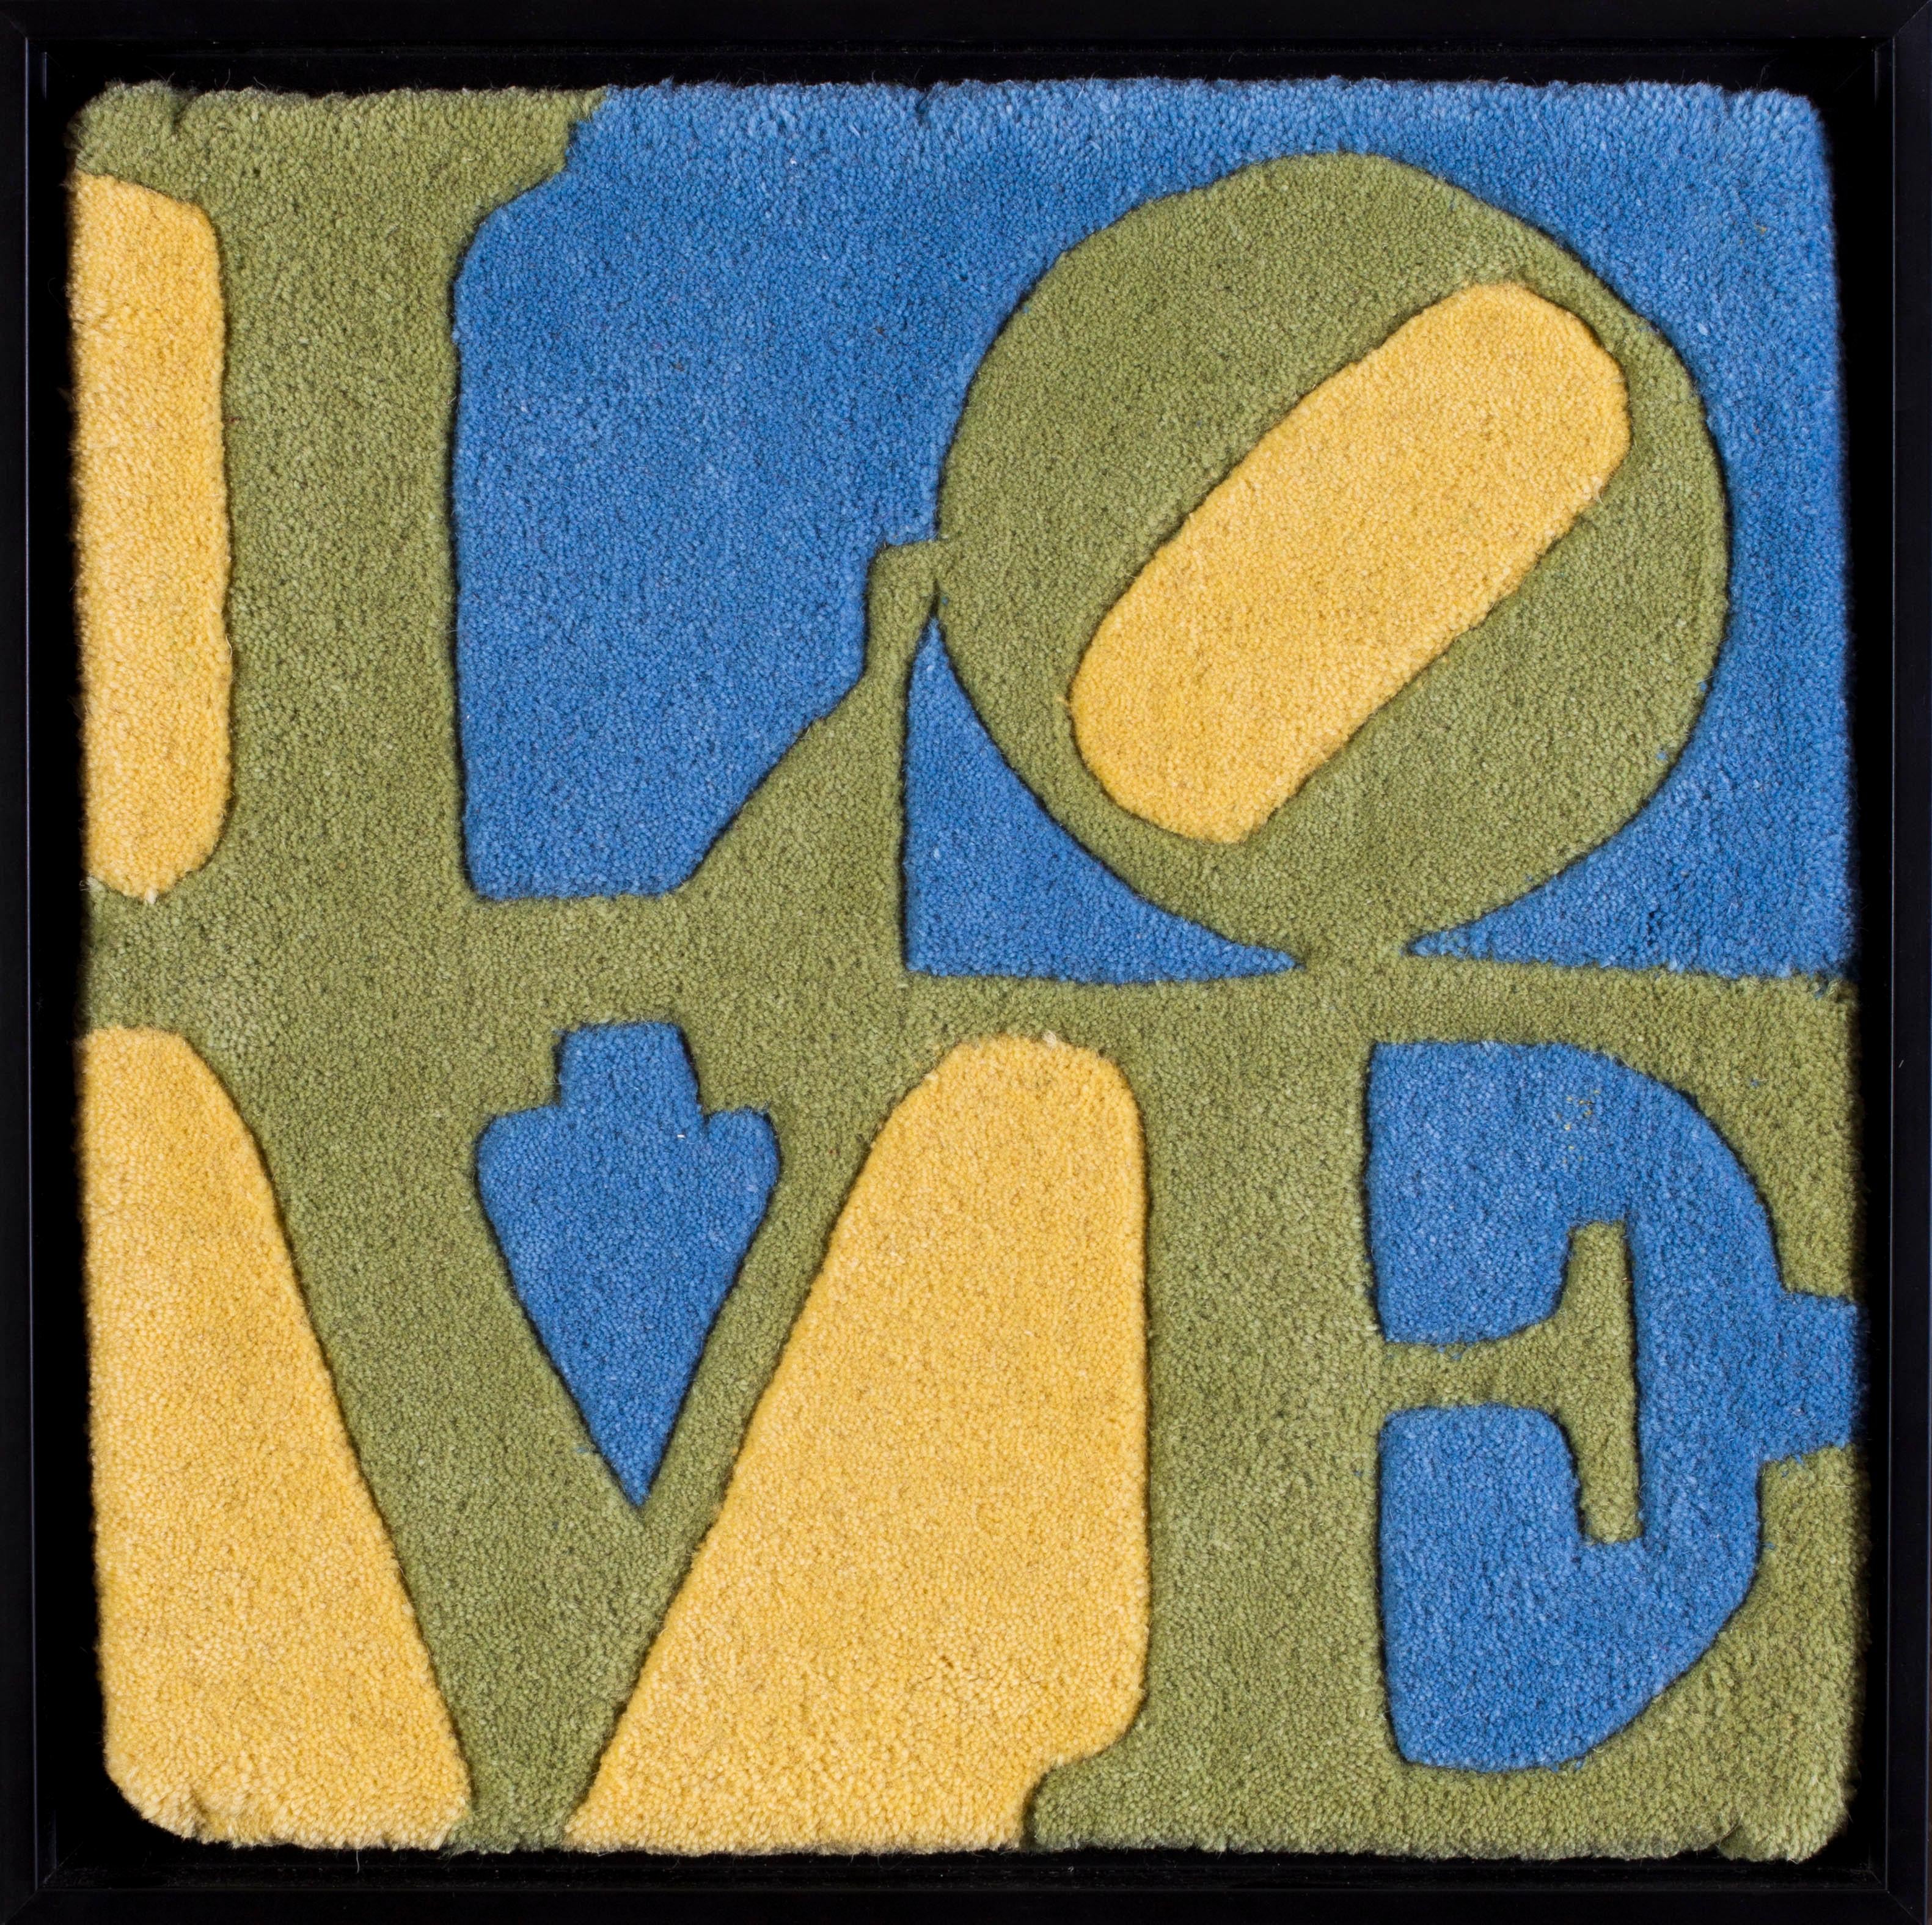 Spring, mixed media 'Love' popart piece in green, yellow and blue by Indiana - Mixed Media Art by (After) Robert Indiana